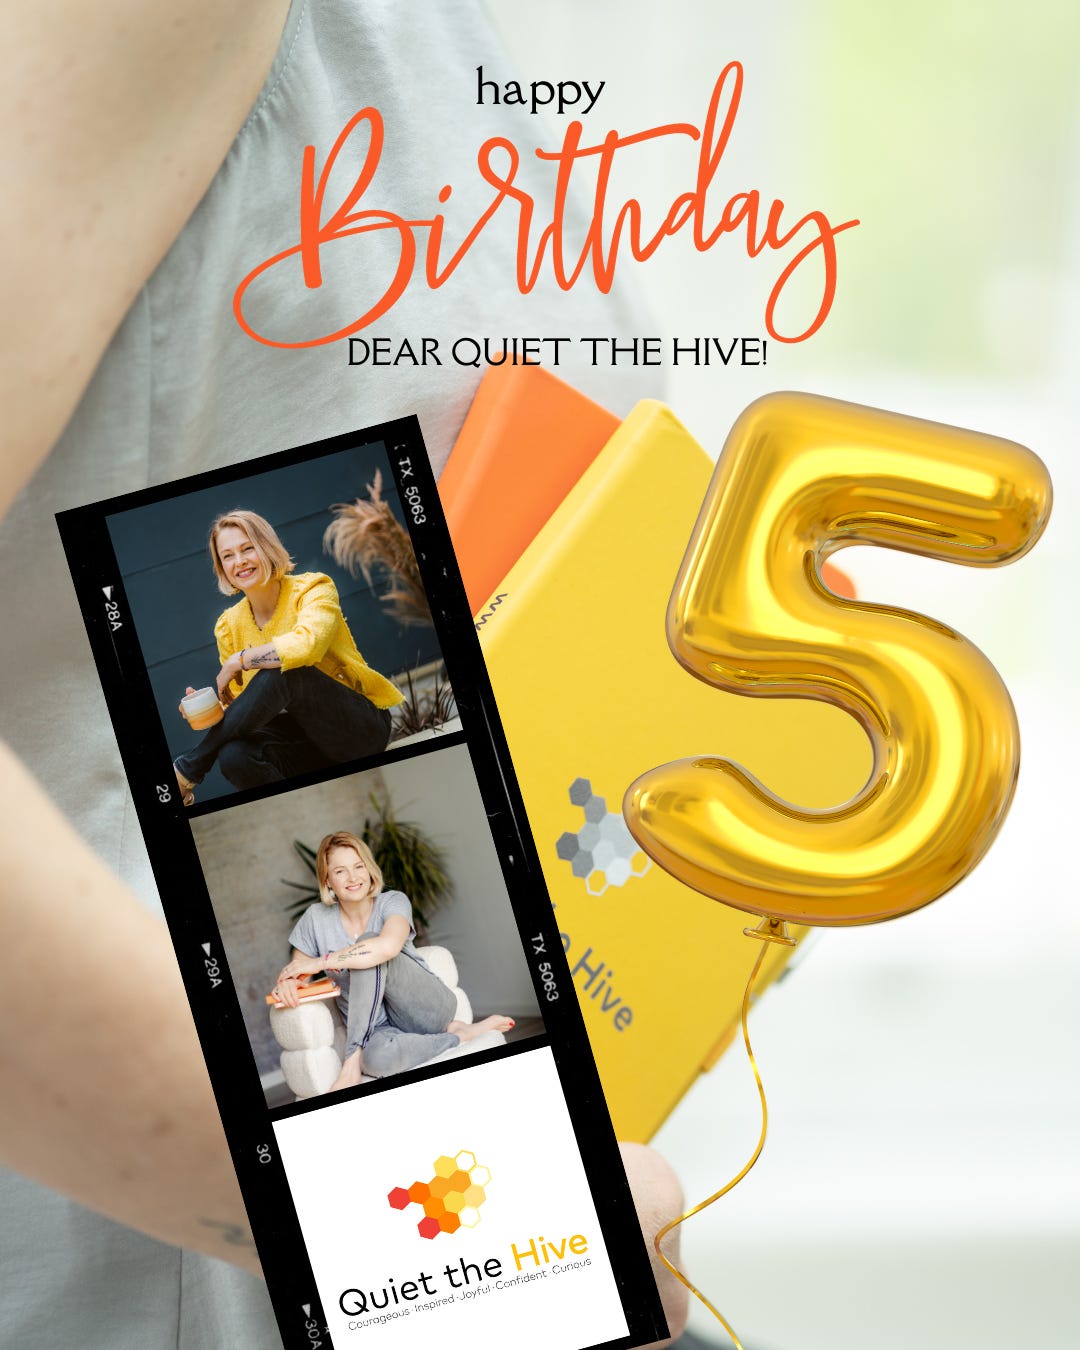 A happy birthday message featuring images from Quiet the Hive